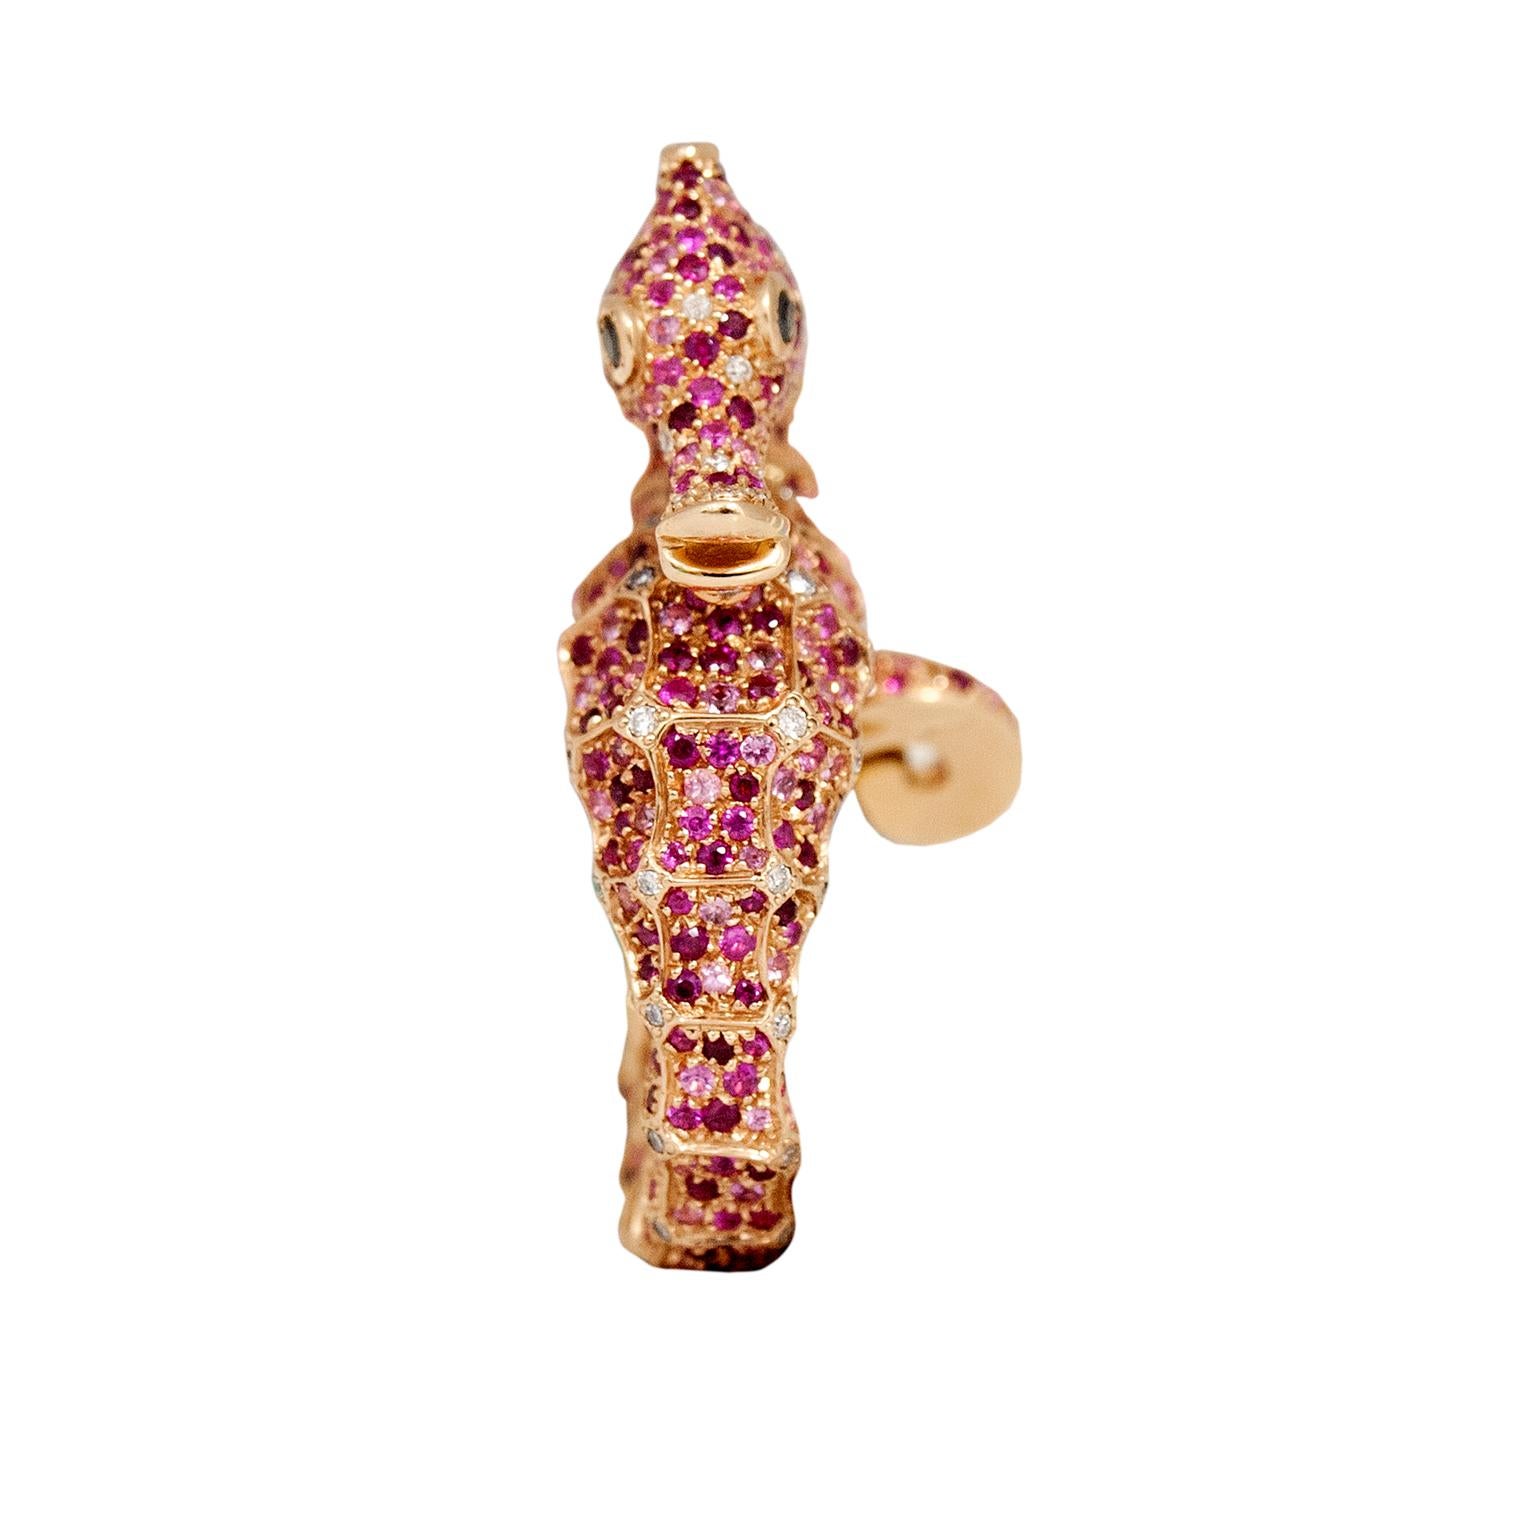 Petronilla Hippocampus Sea Horse Diamond Pink Sapphire Ruby 18Kt Gold Ring made in Italy
This is a statuesque ring, elegant and harmonious in its volume and size. It's entirely covered by many precious stones such as black and white diamonds, pink